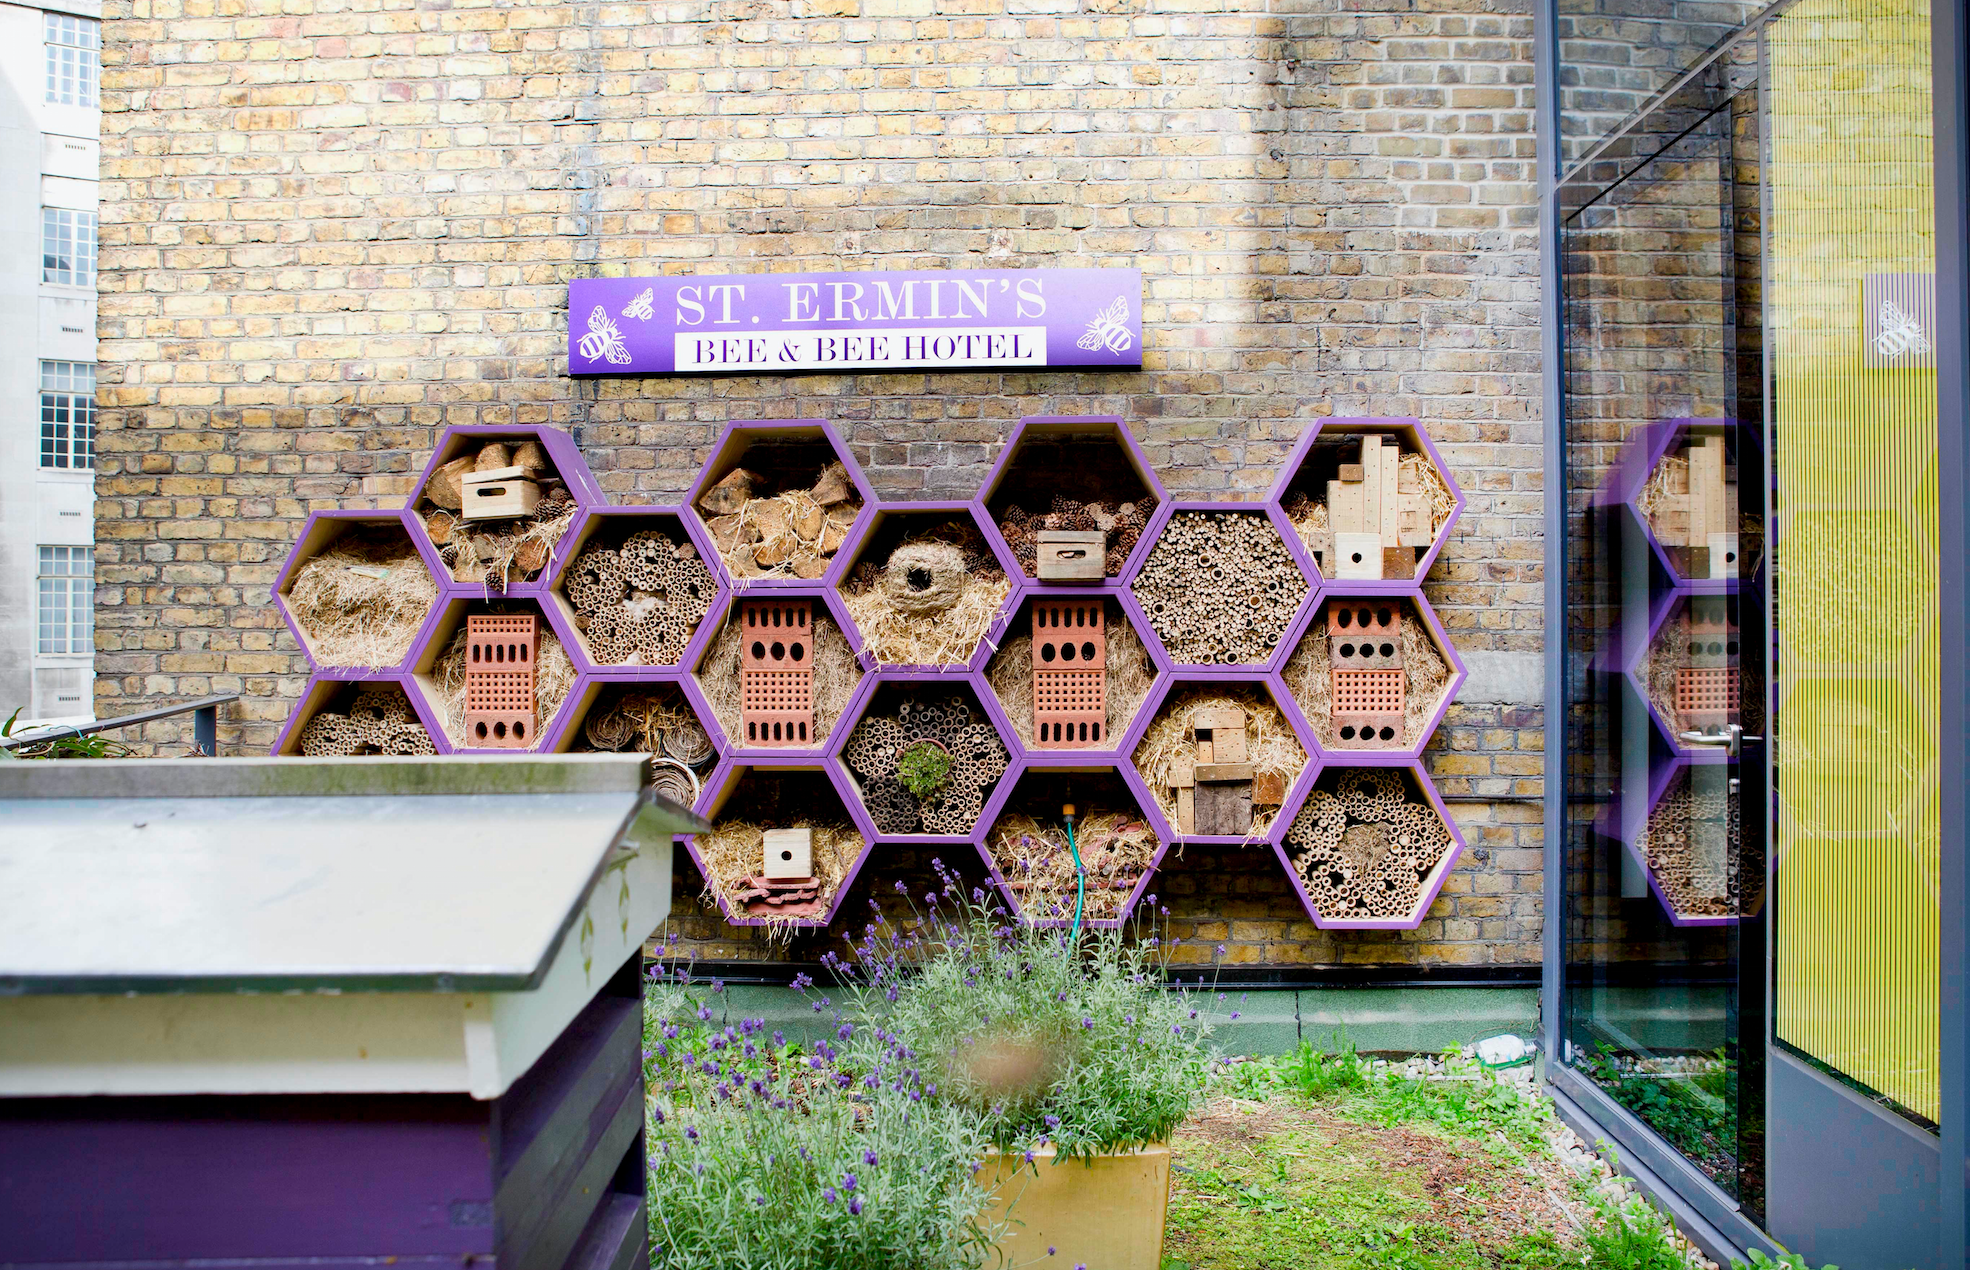 London's first bee and bee hotel